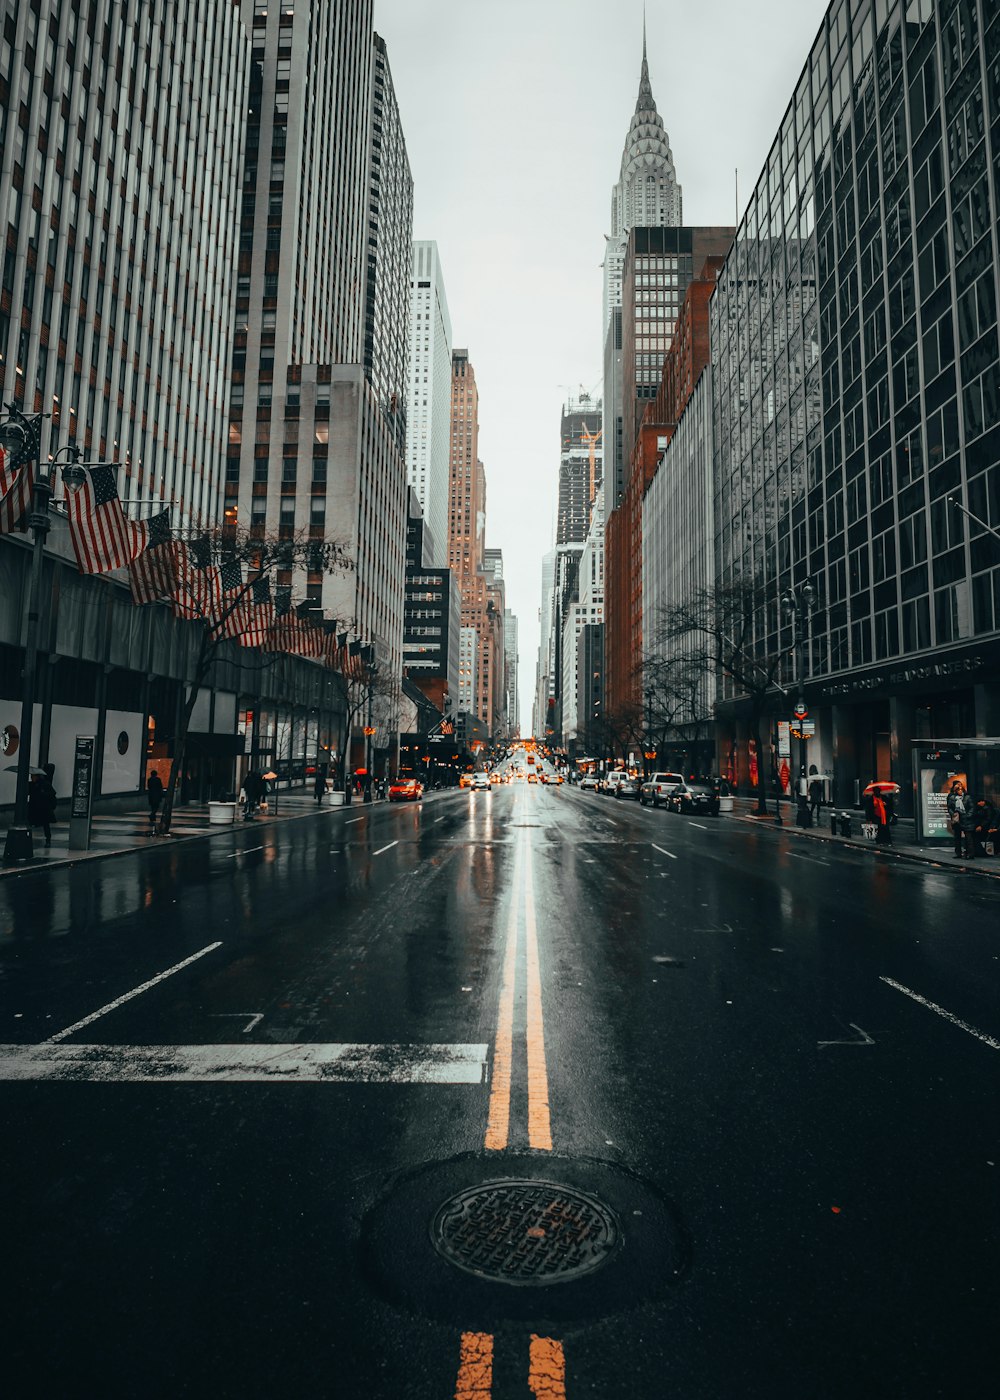 100 Street Pictures Download Free Images On Unsplash